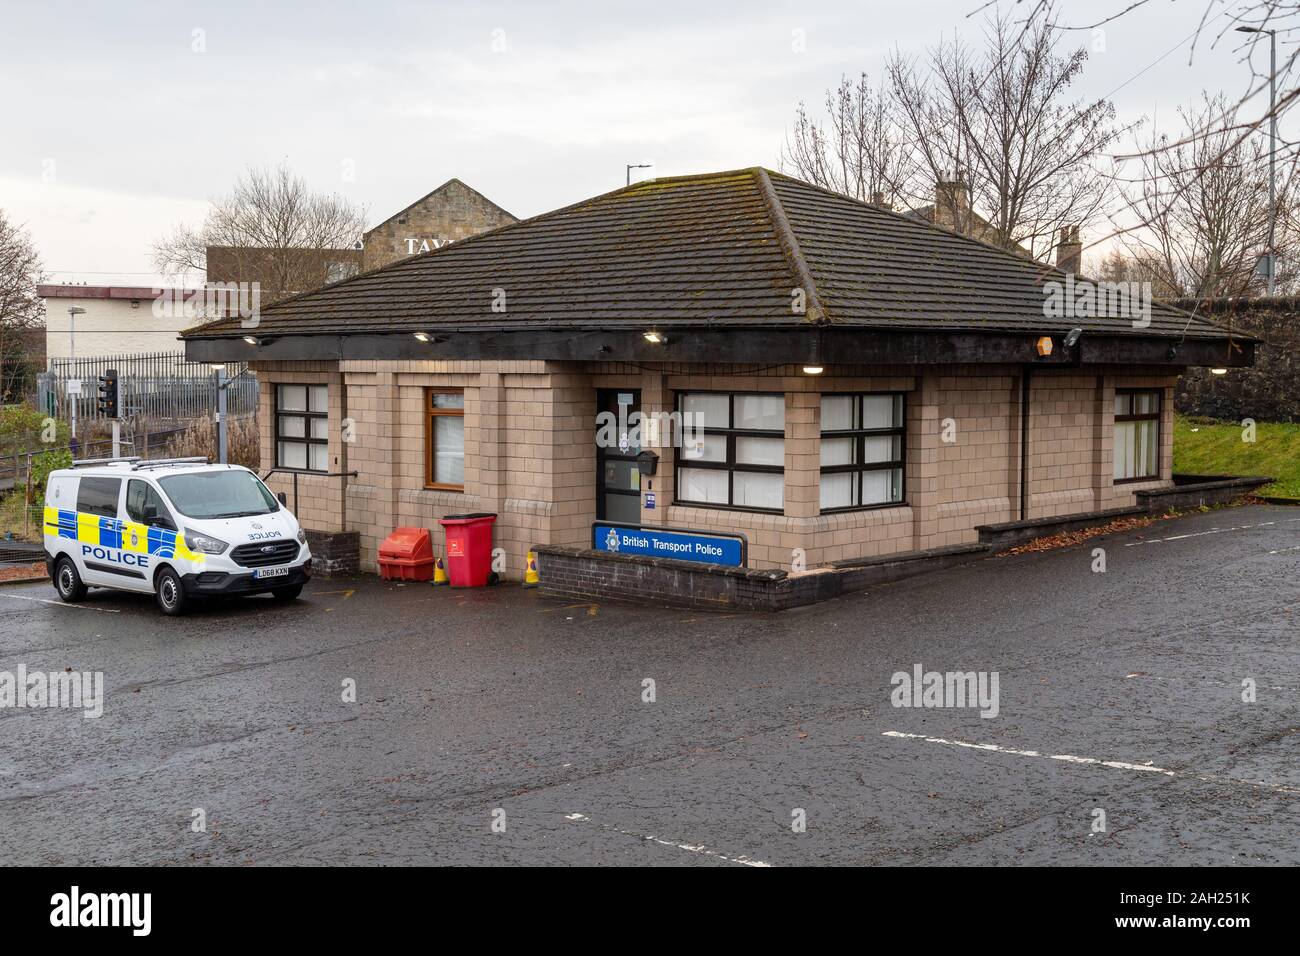 The British Transport Police Station situated in the car park of Kilwinning railway station in North Ayrshire, United Kingdom Stock Photo